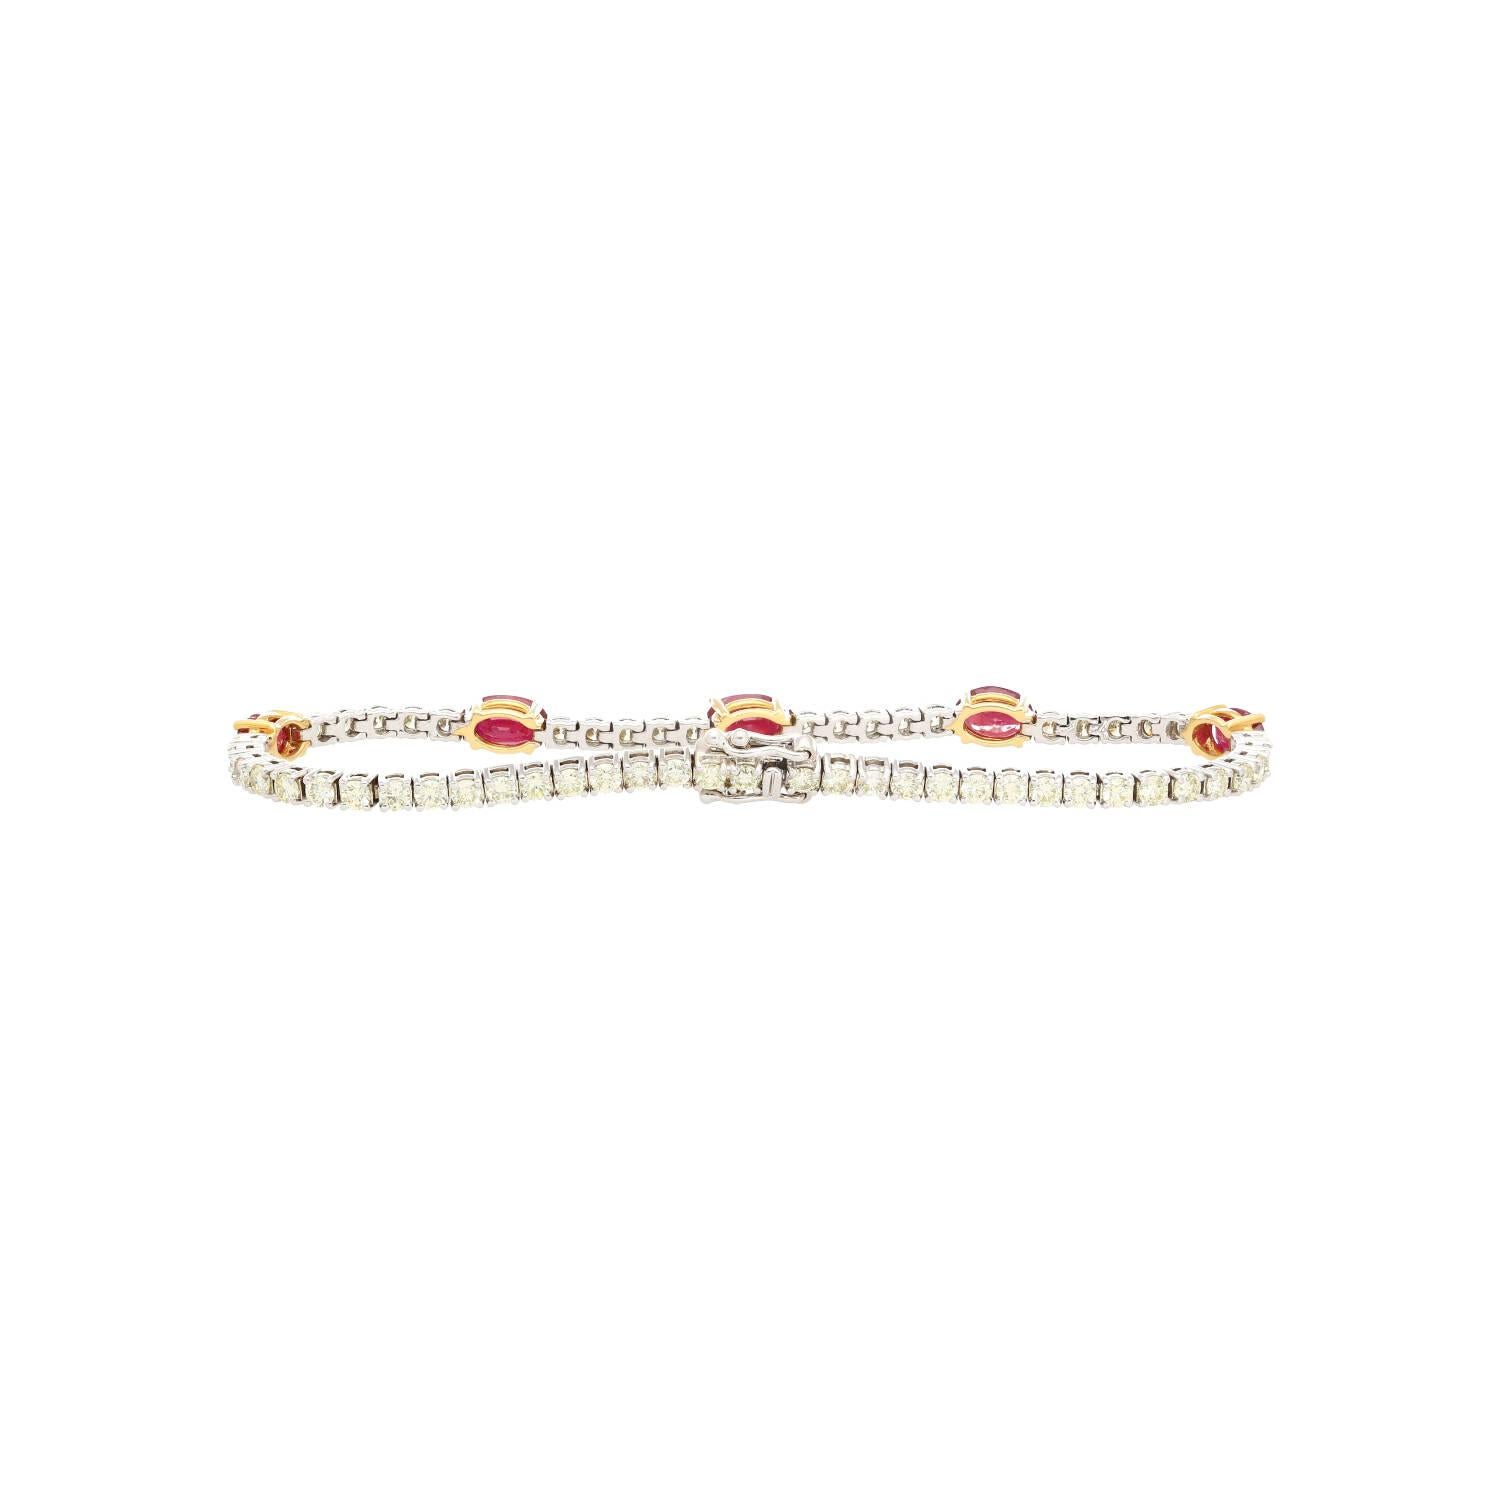 Oval Cut 5.13 Carat Ruby and Diamond Tennis Bracelet in 18k White Gold For Sale